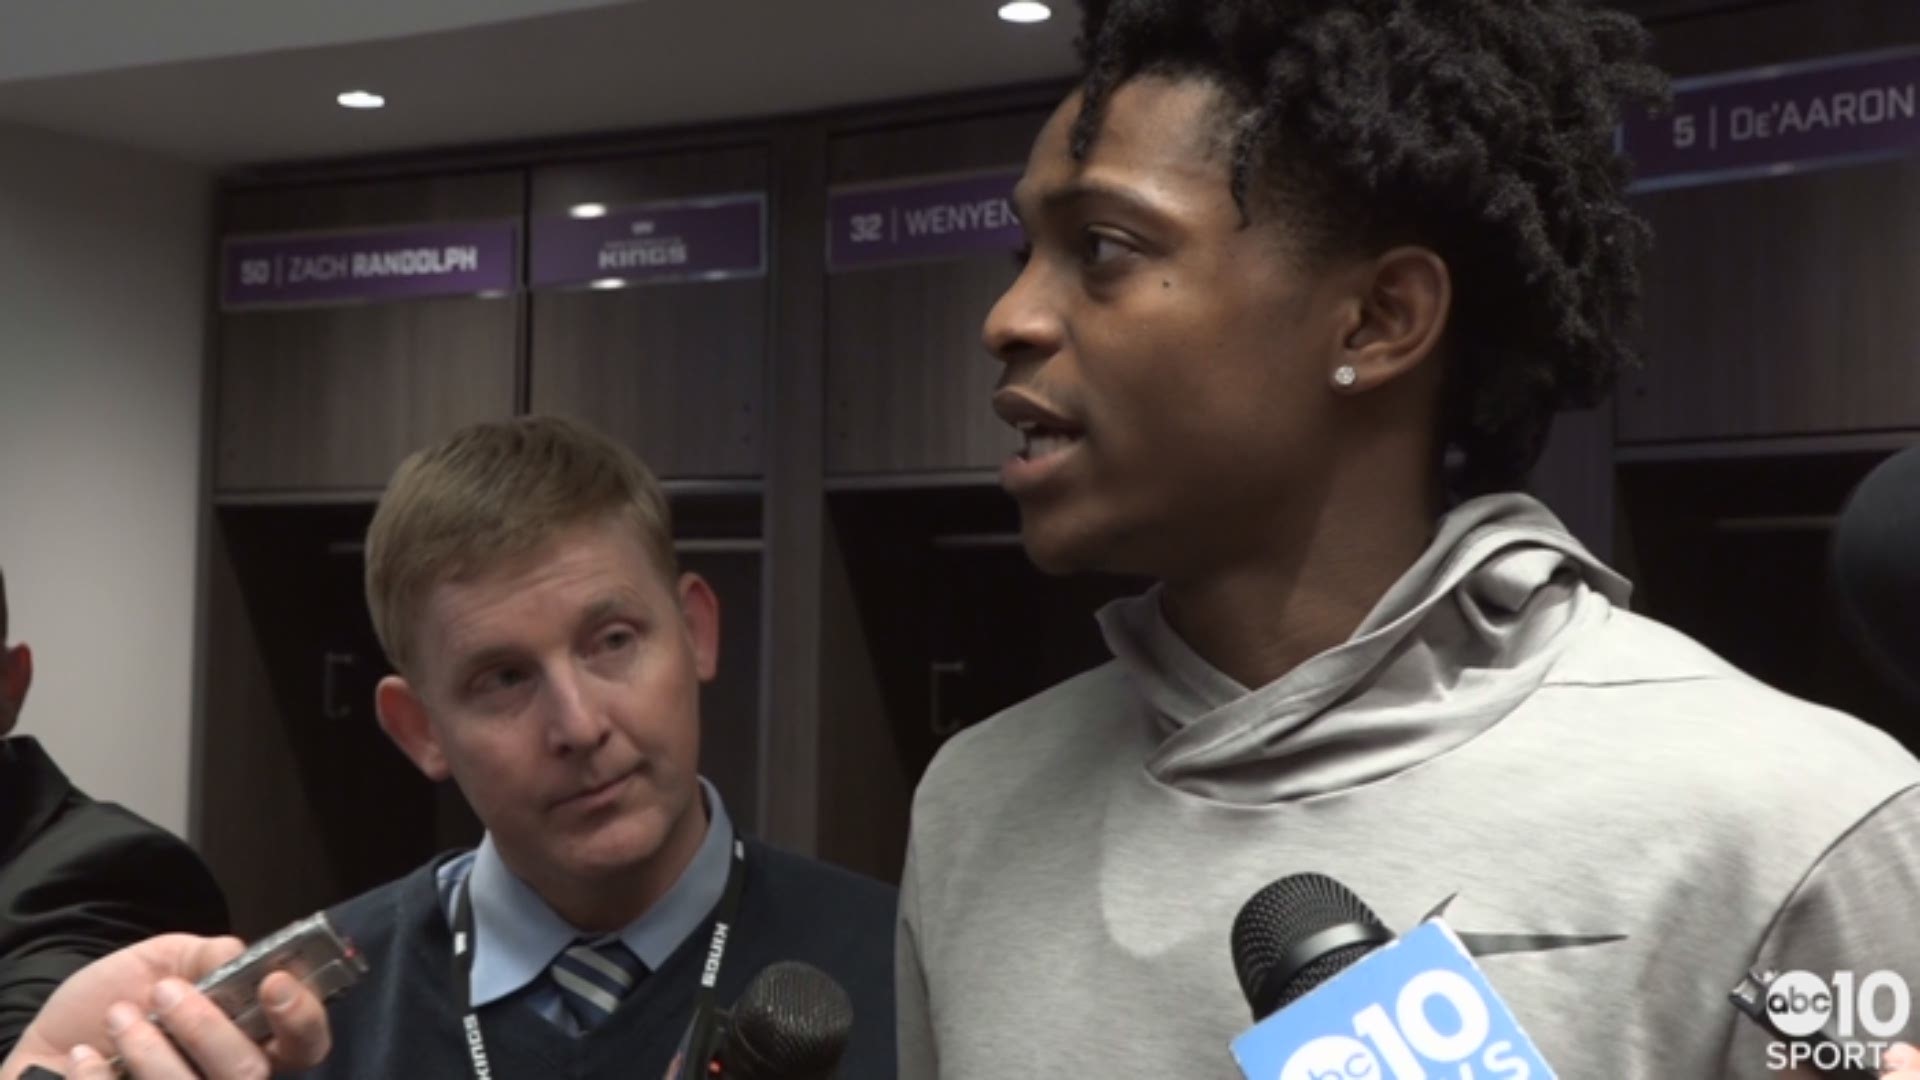 Kings point guard De'Aaron Fox discusses what went wrong in the closing minute of their loss to the Warriors on Friday night, and taking the defending champions to the wire in both games this season.